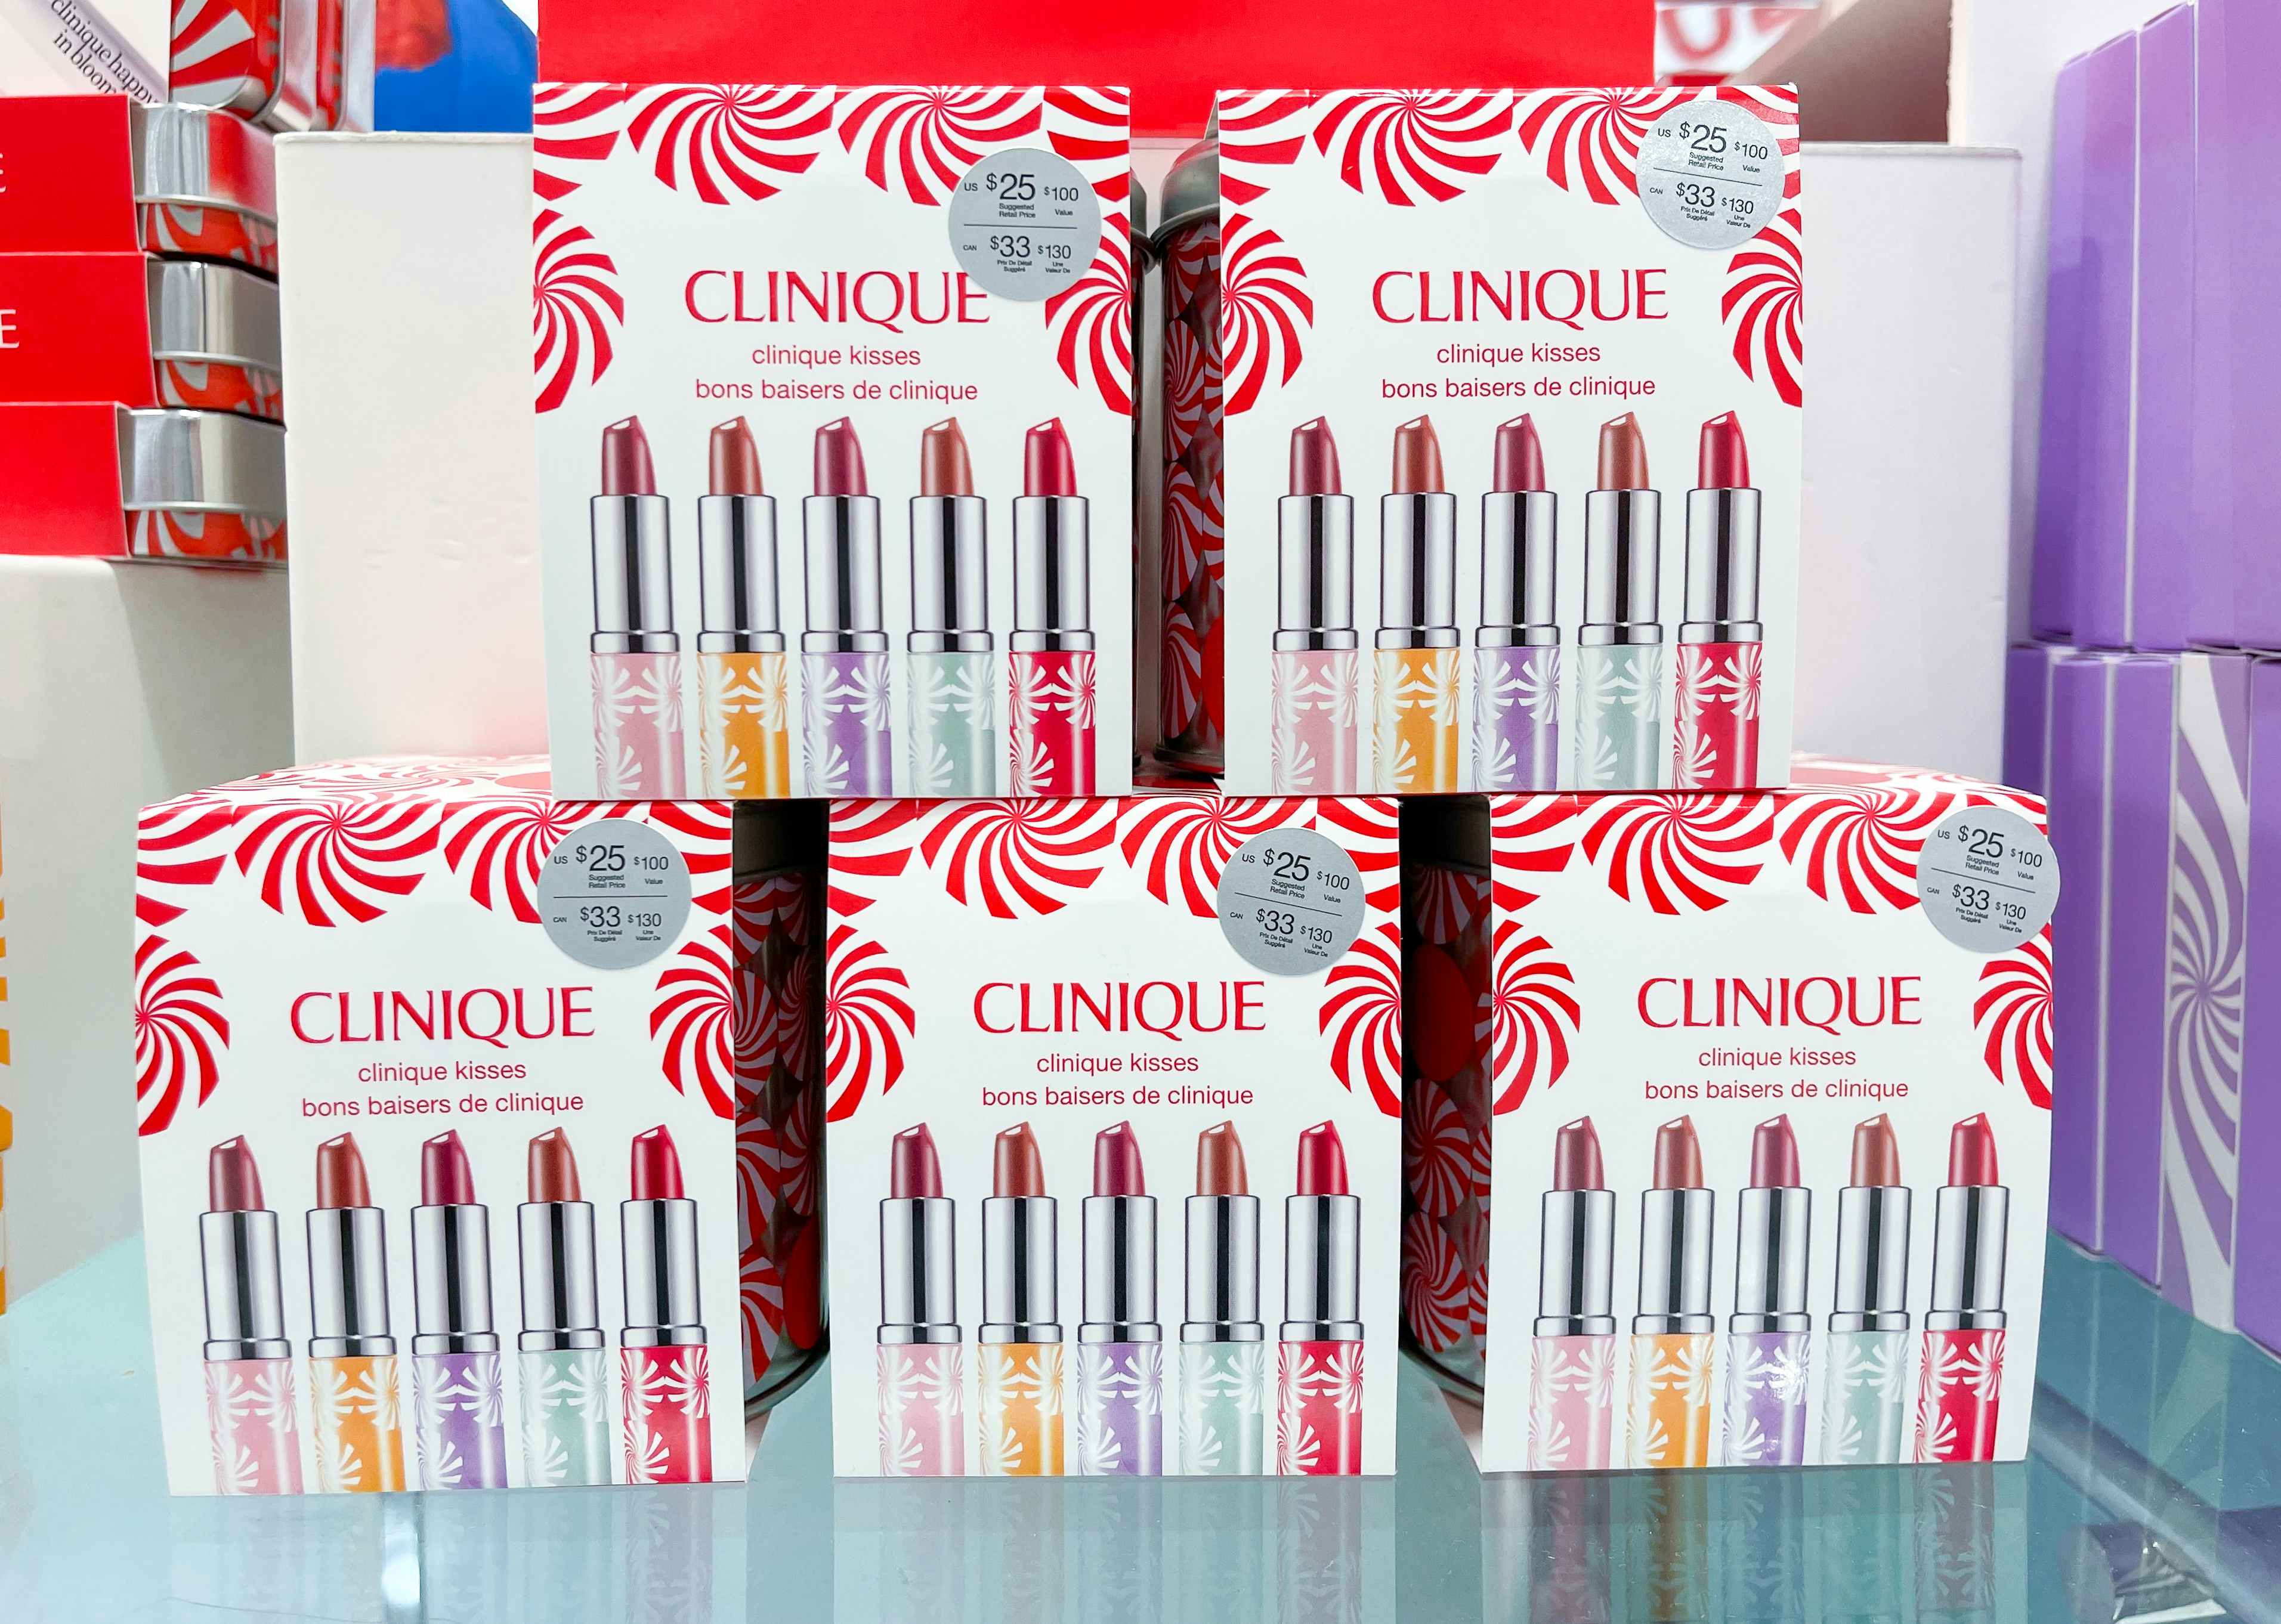 A display of Clinique makeup sets on a glass counter at Macy's.